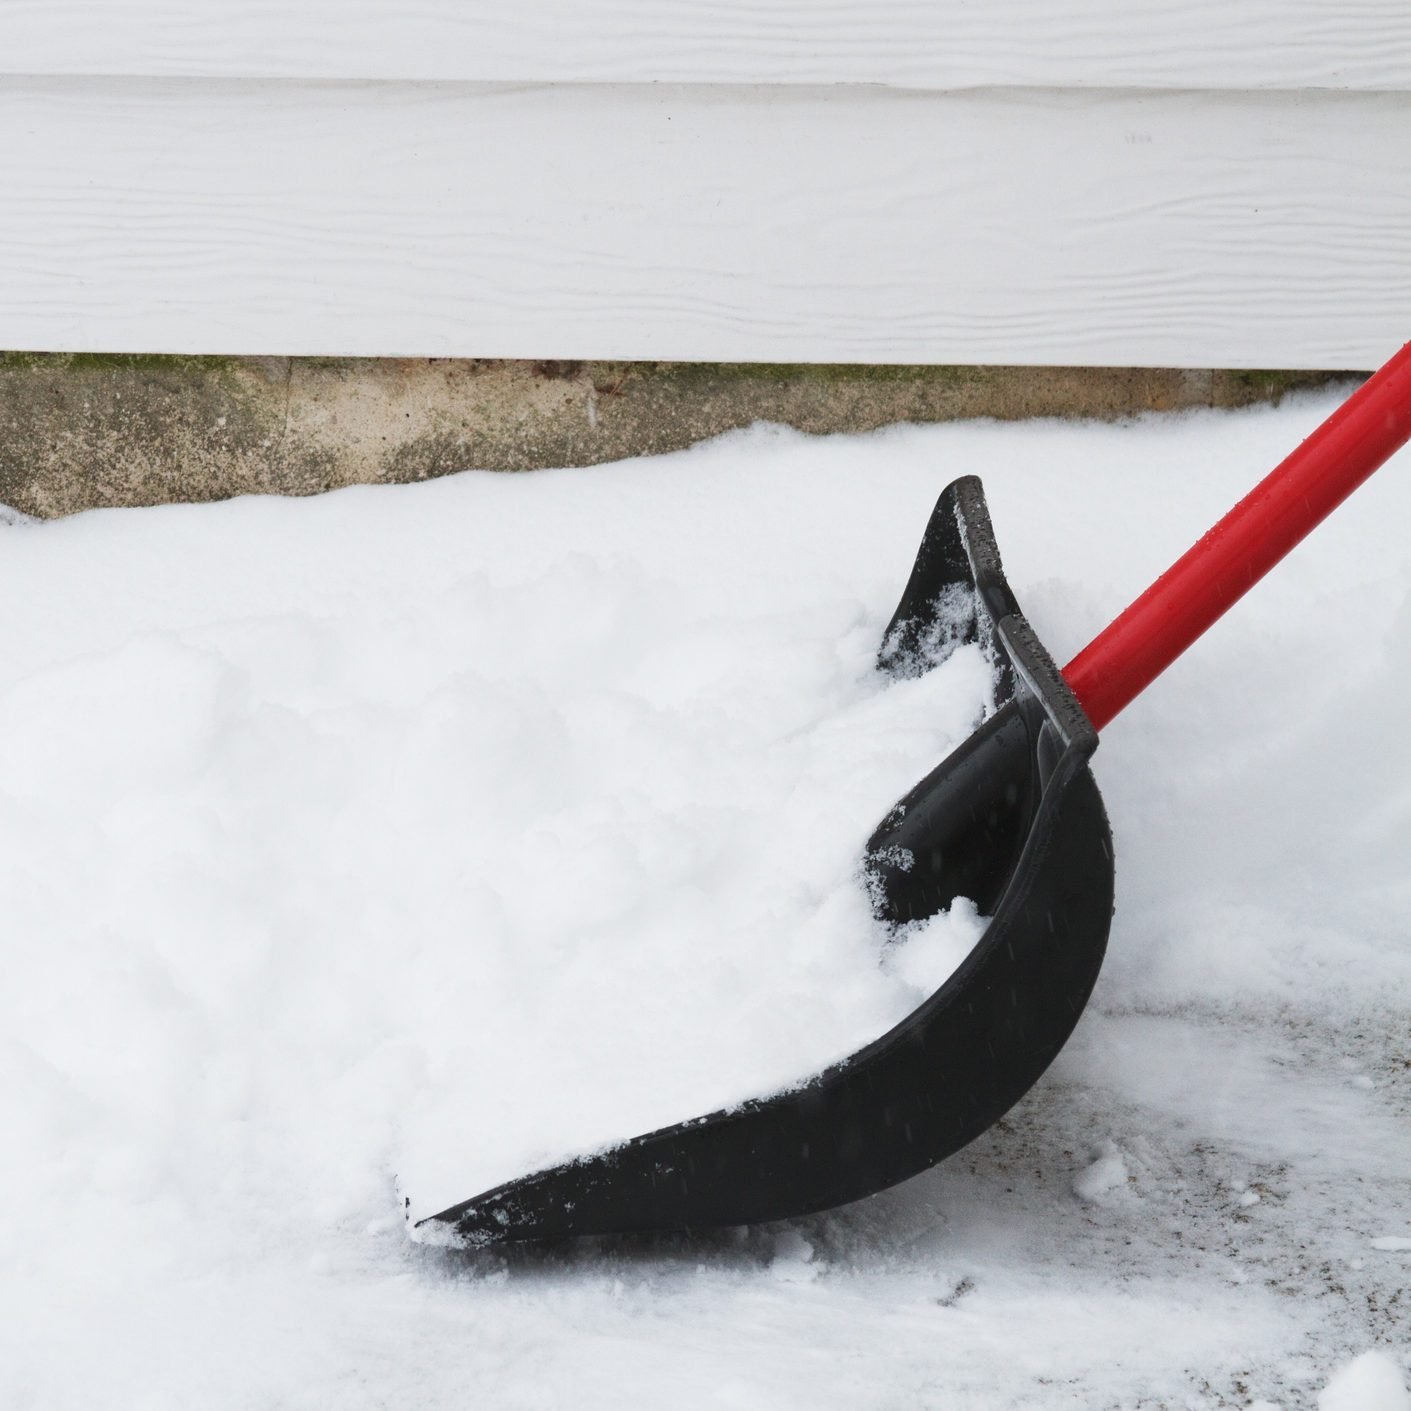 Shoveling Snow, Heart Attack, and Stroke: 3 Heart Doctors Share Their Insights on Staying Safe